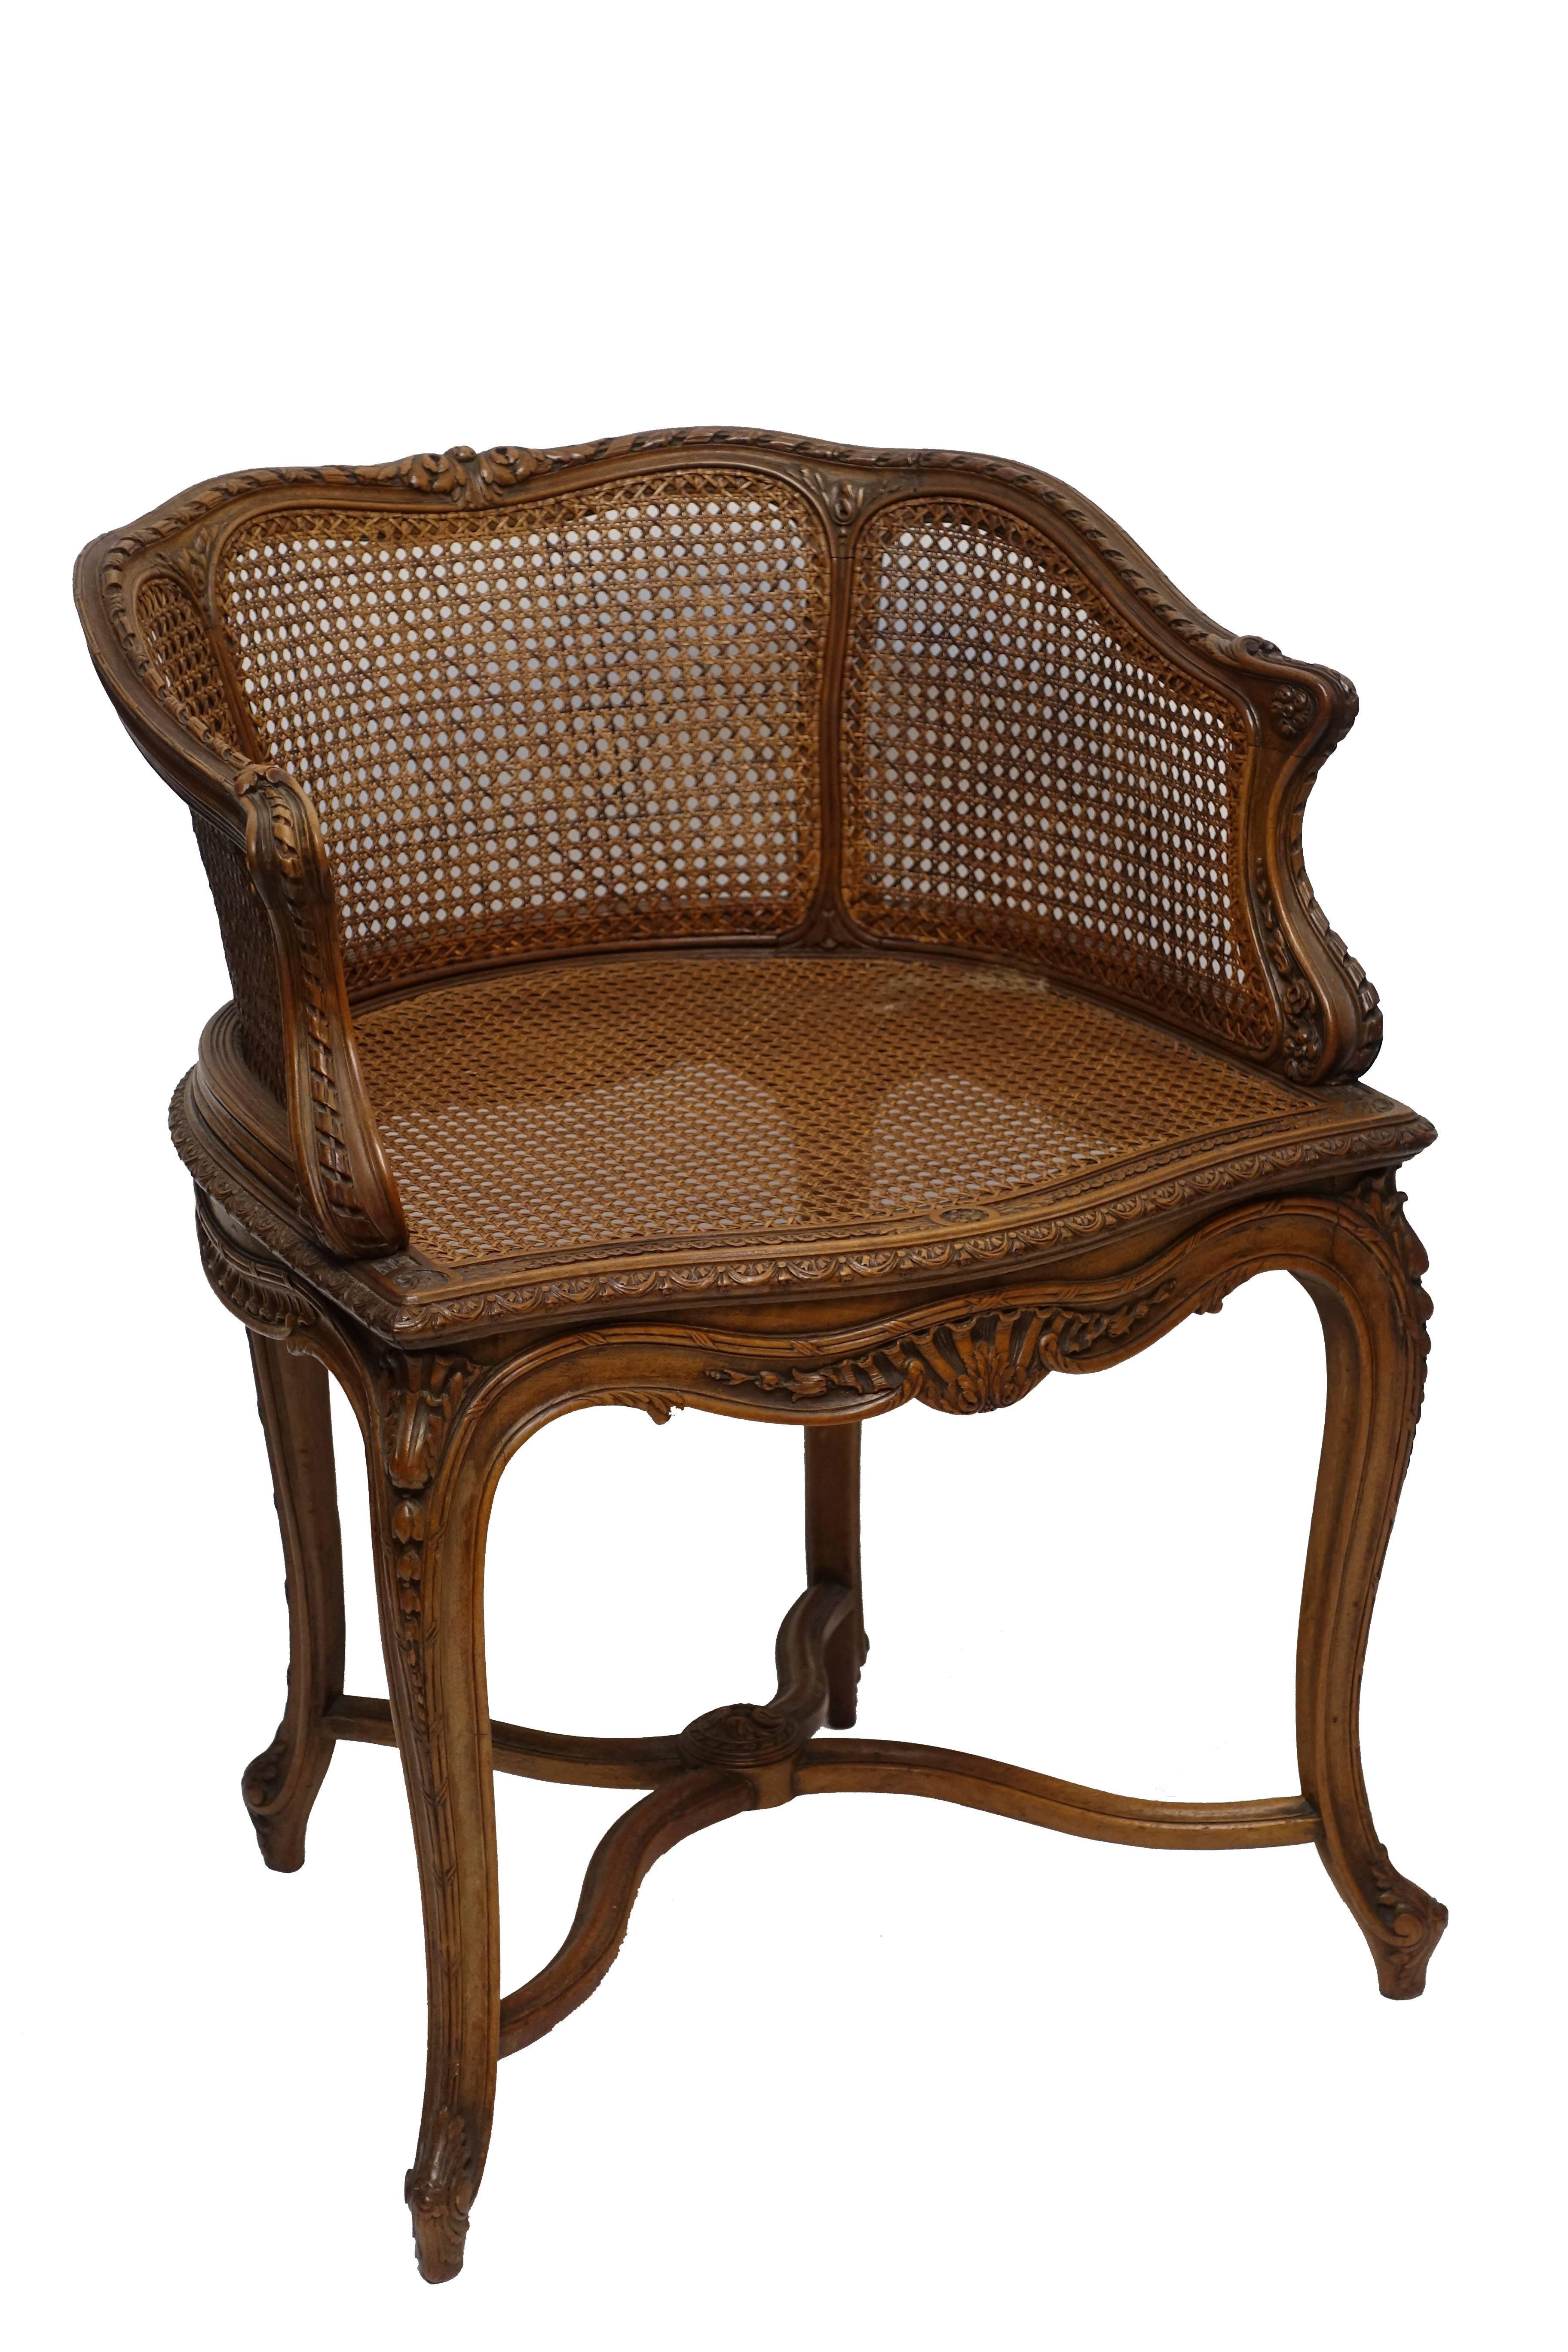 Carved Walnut Vanity Dressing Table Bergere Chair, French, circa 1900 2